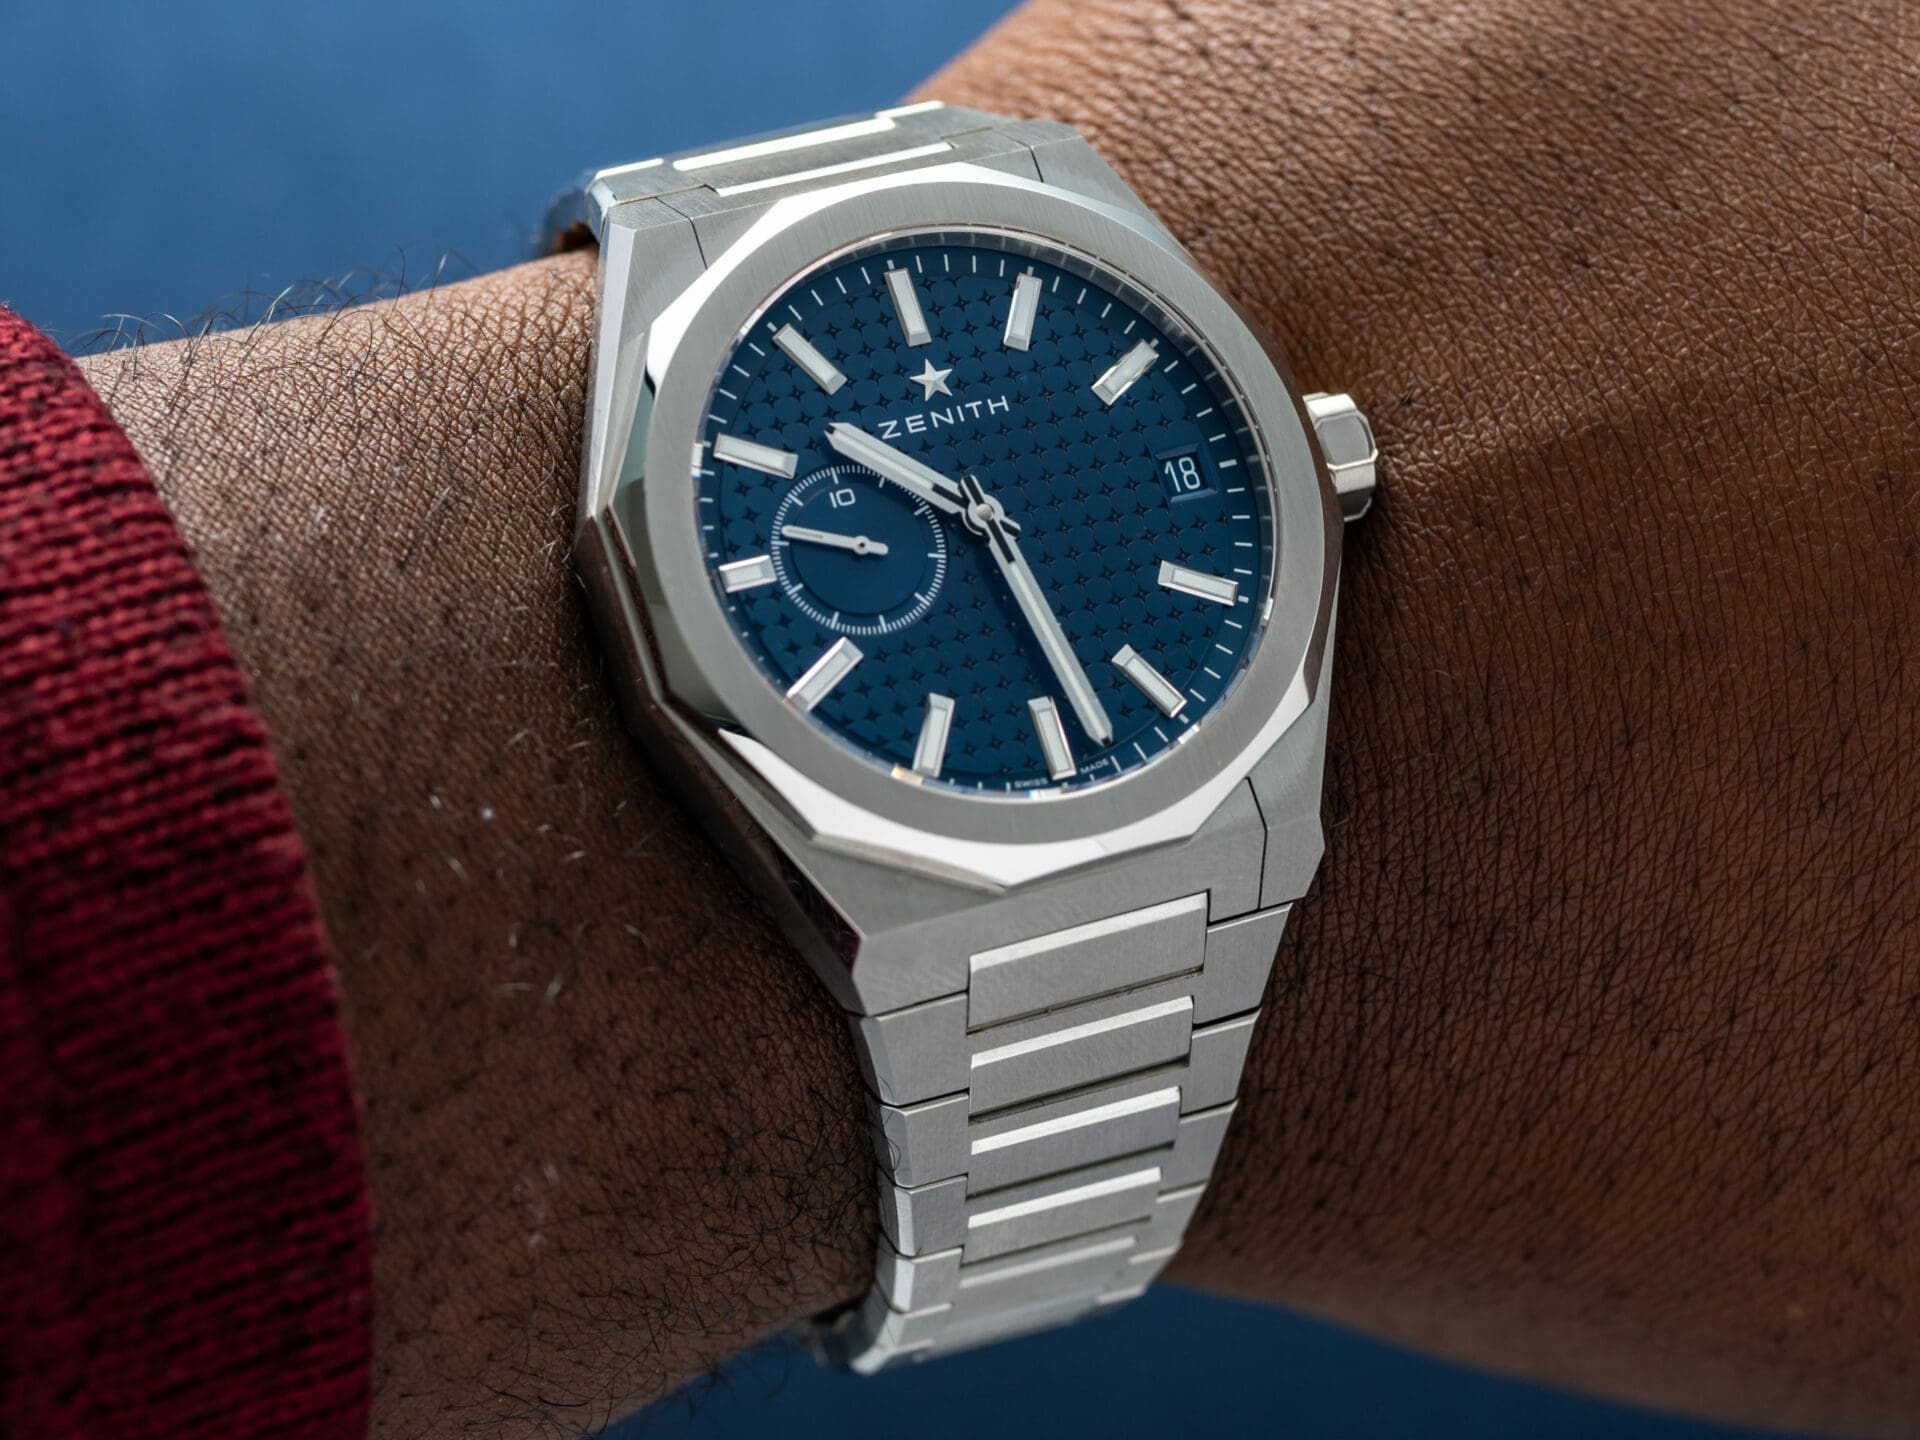 HANDS-ON: The New Zenith Defy Skyline Collection